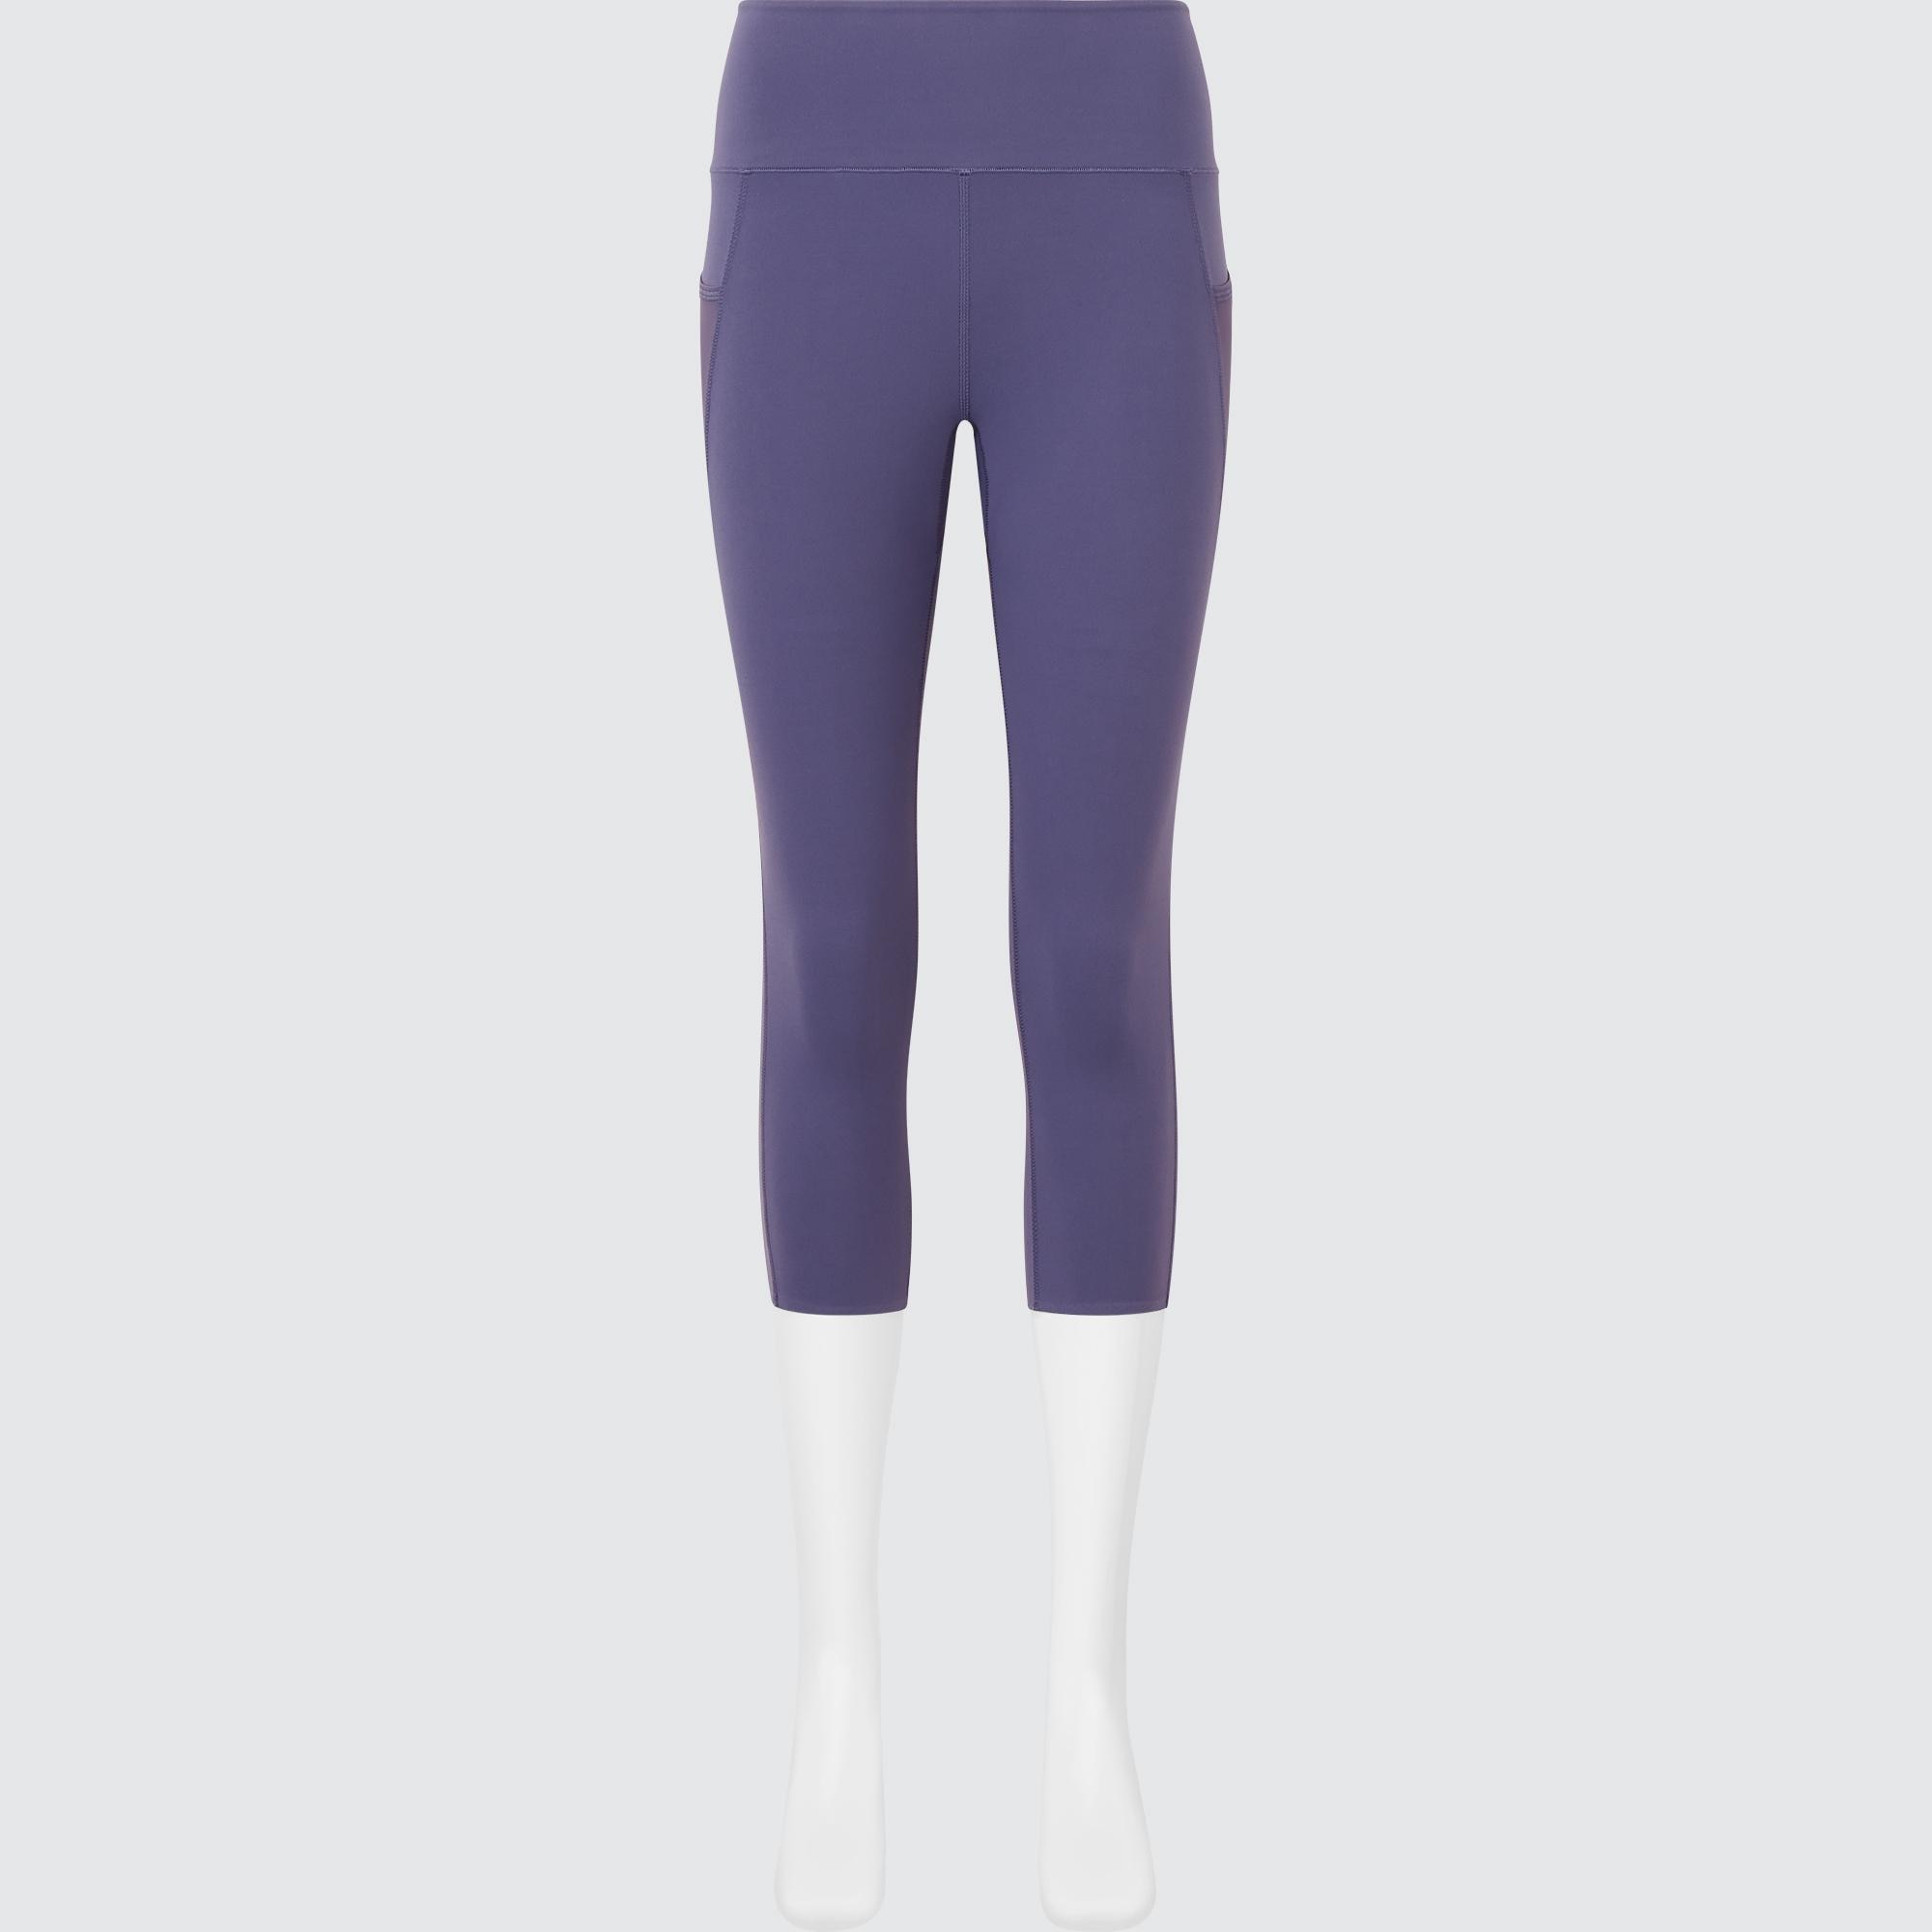 AIRism UV Protection Active Soft Leggings